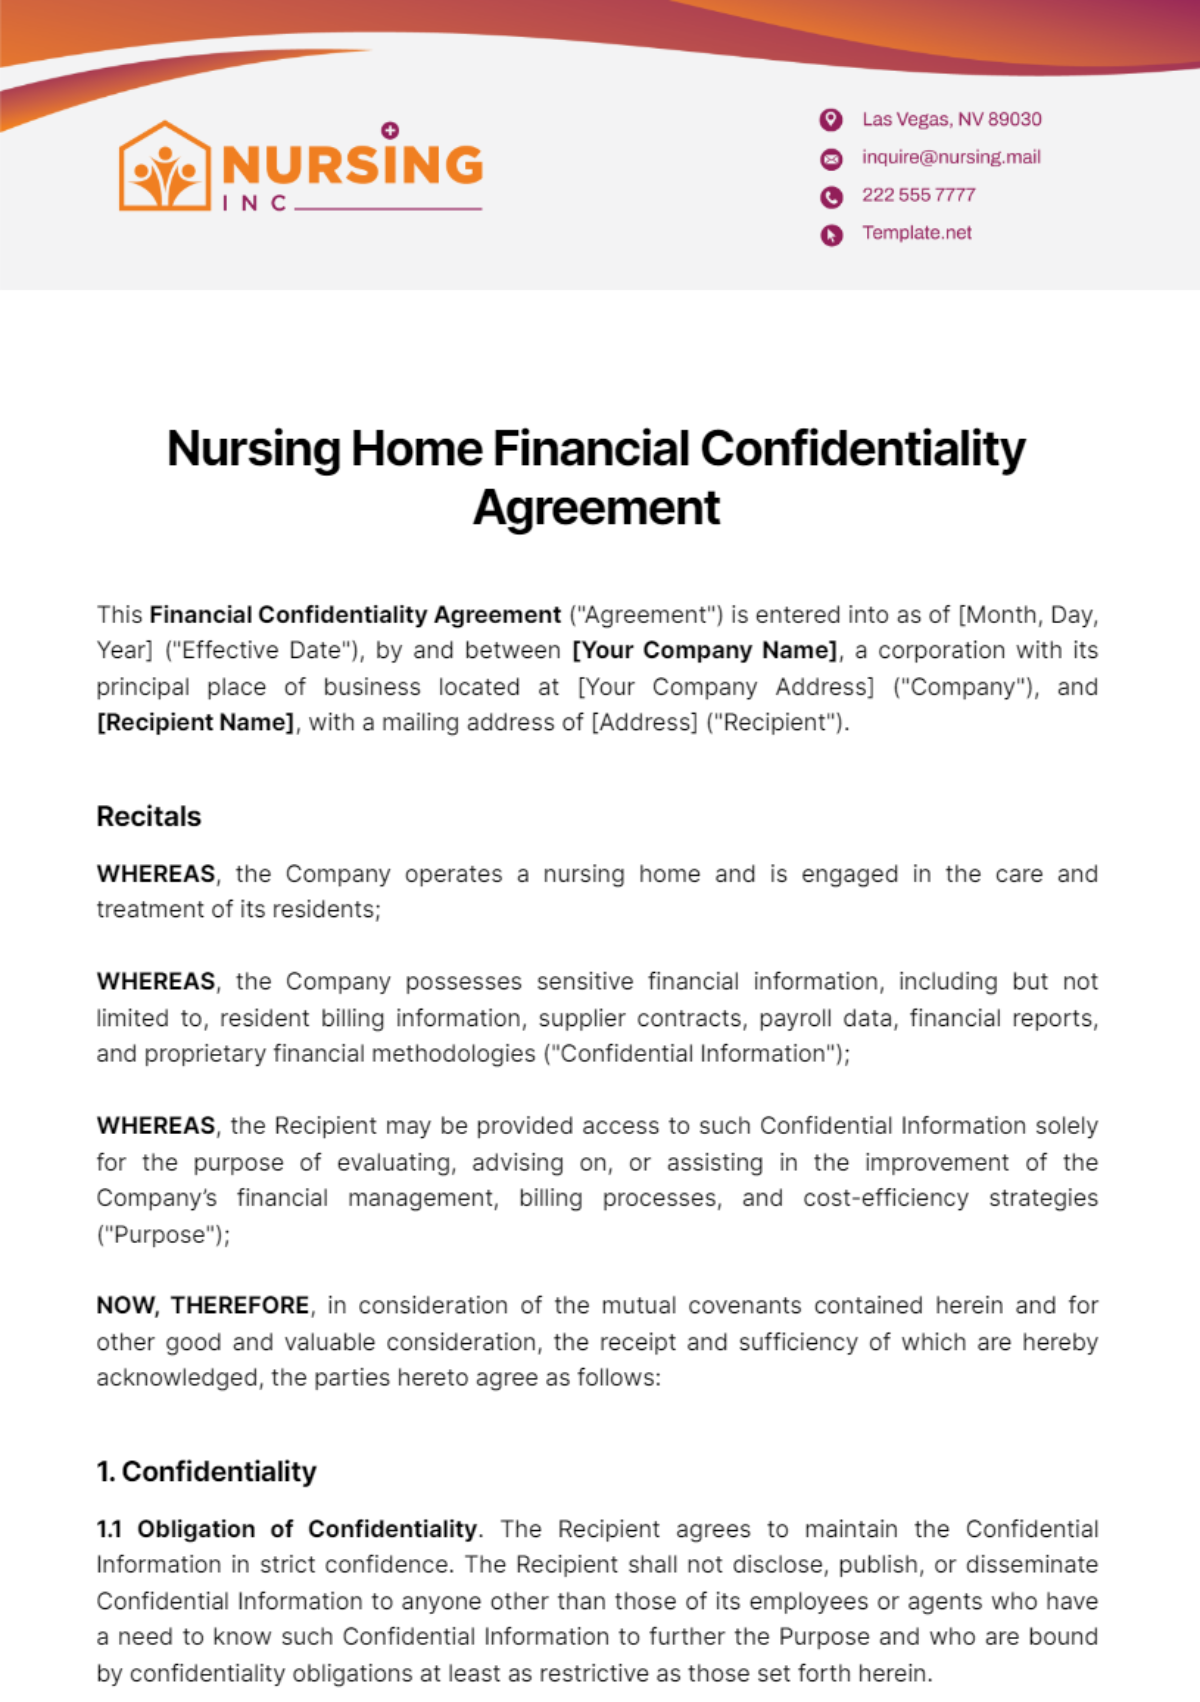 Nursing Home Financial Confidentiality Agreement Template